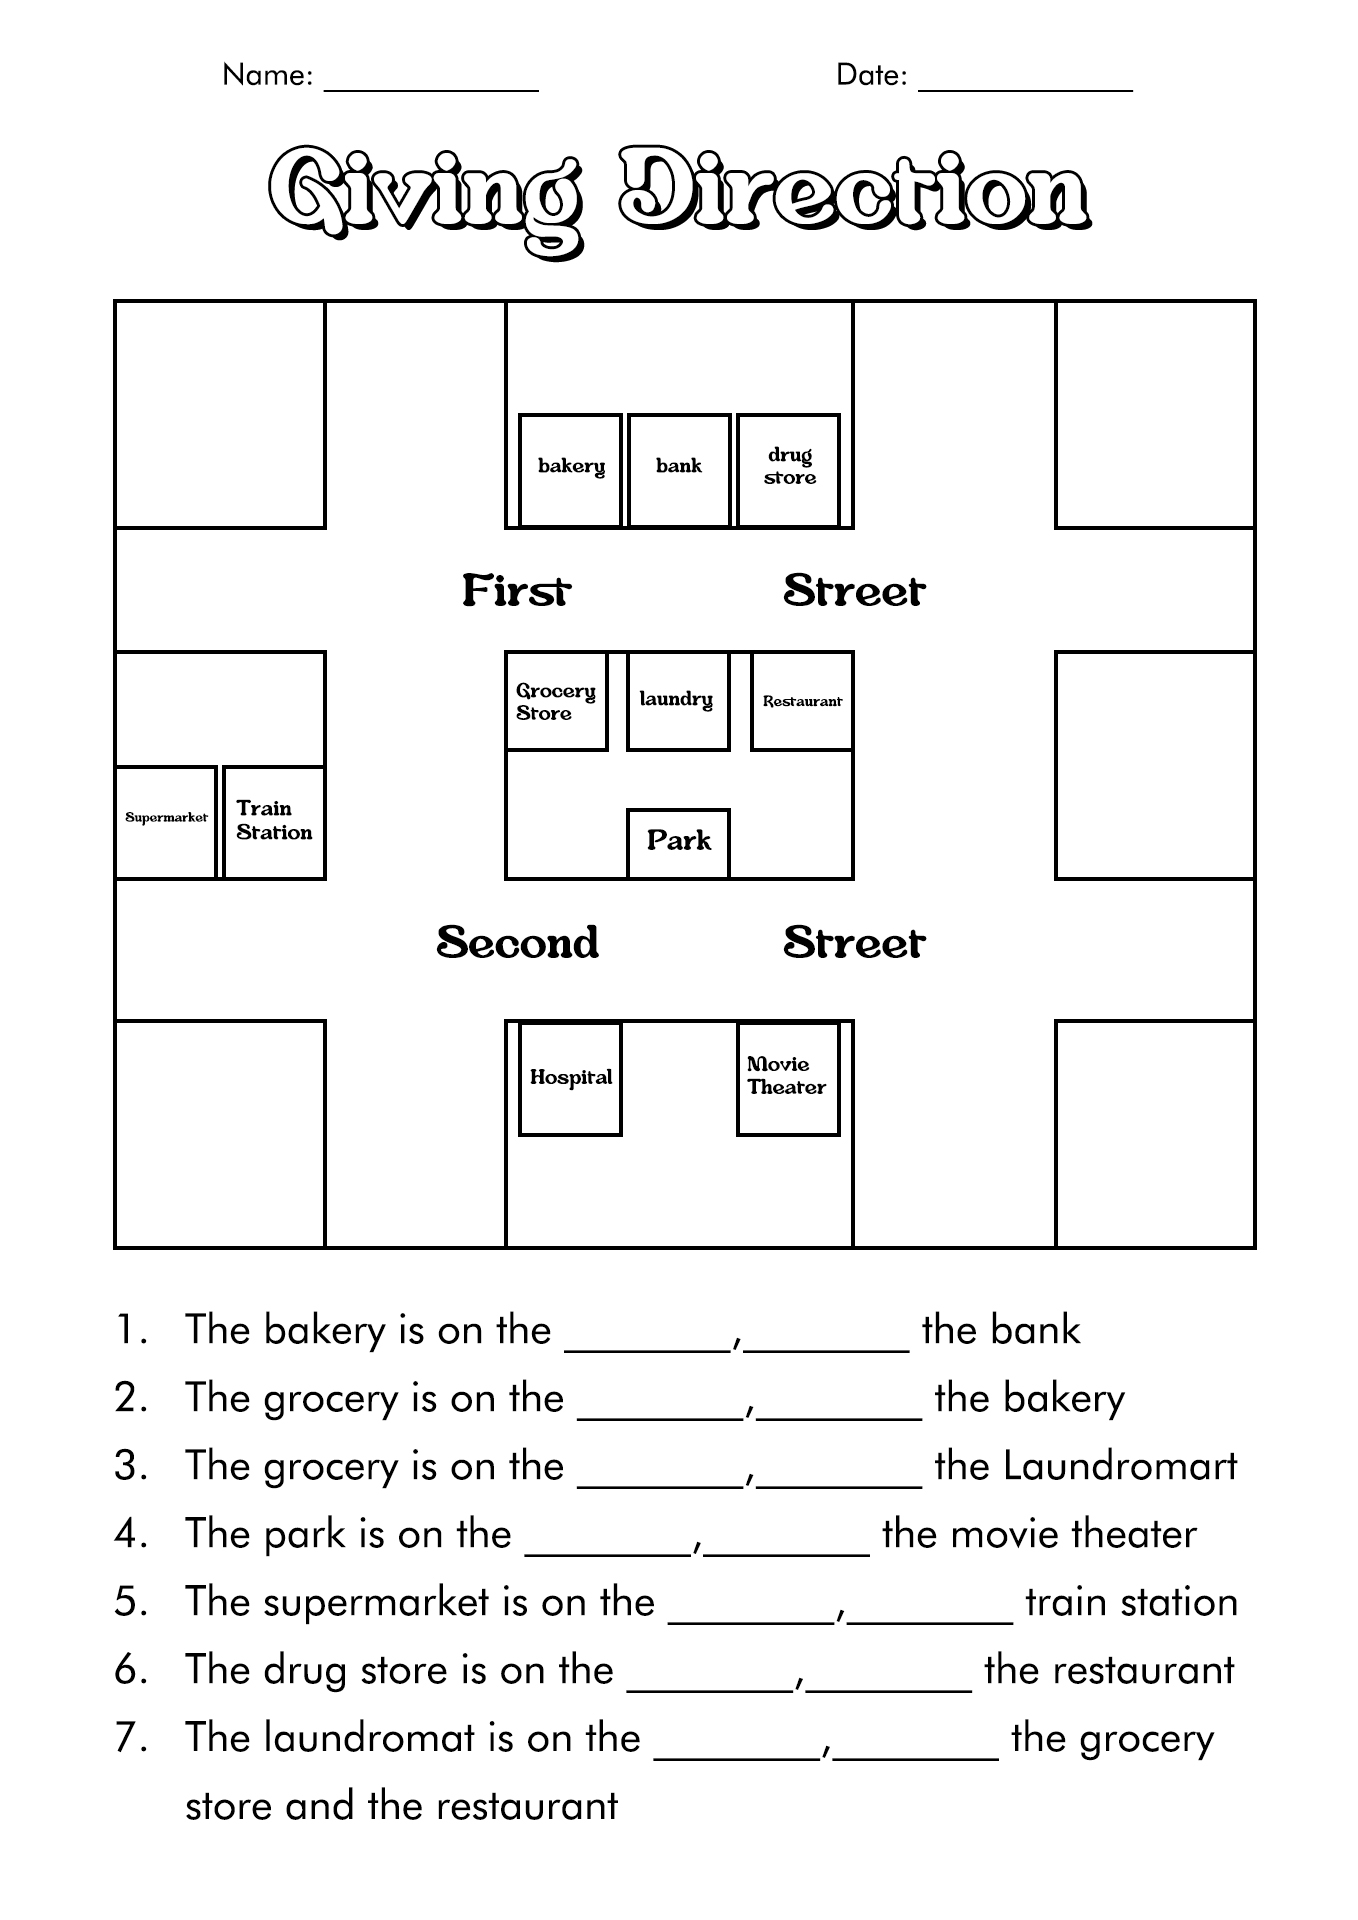 printable-following-directions-worksheets-pdf-printable-word-searches